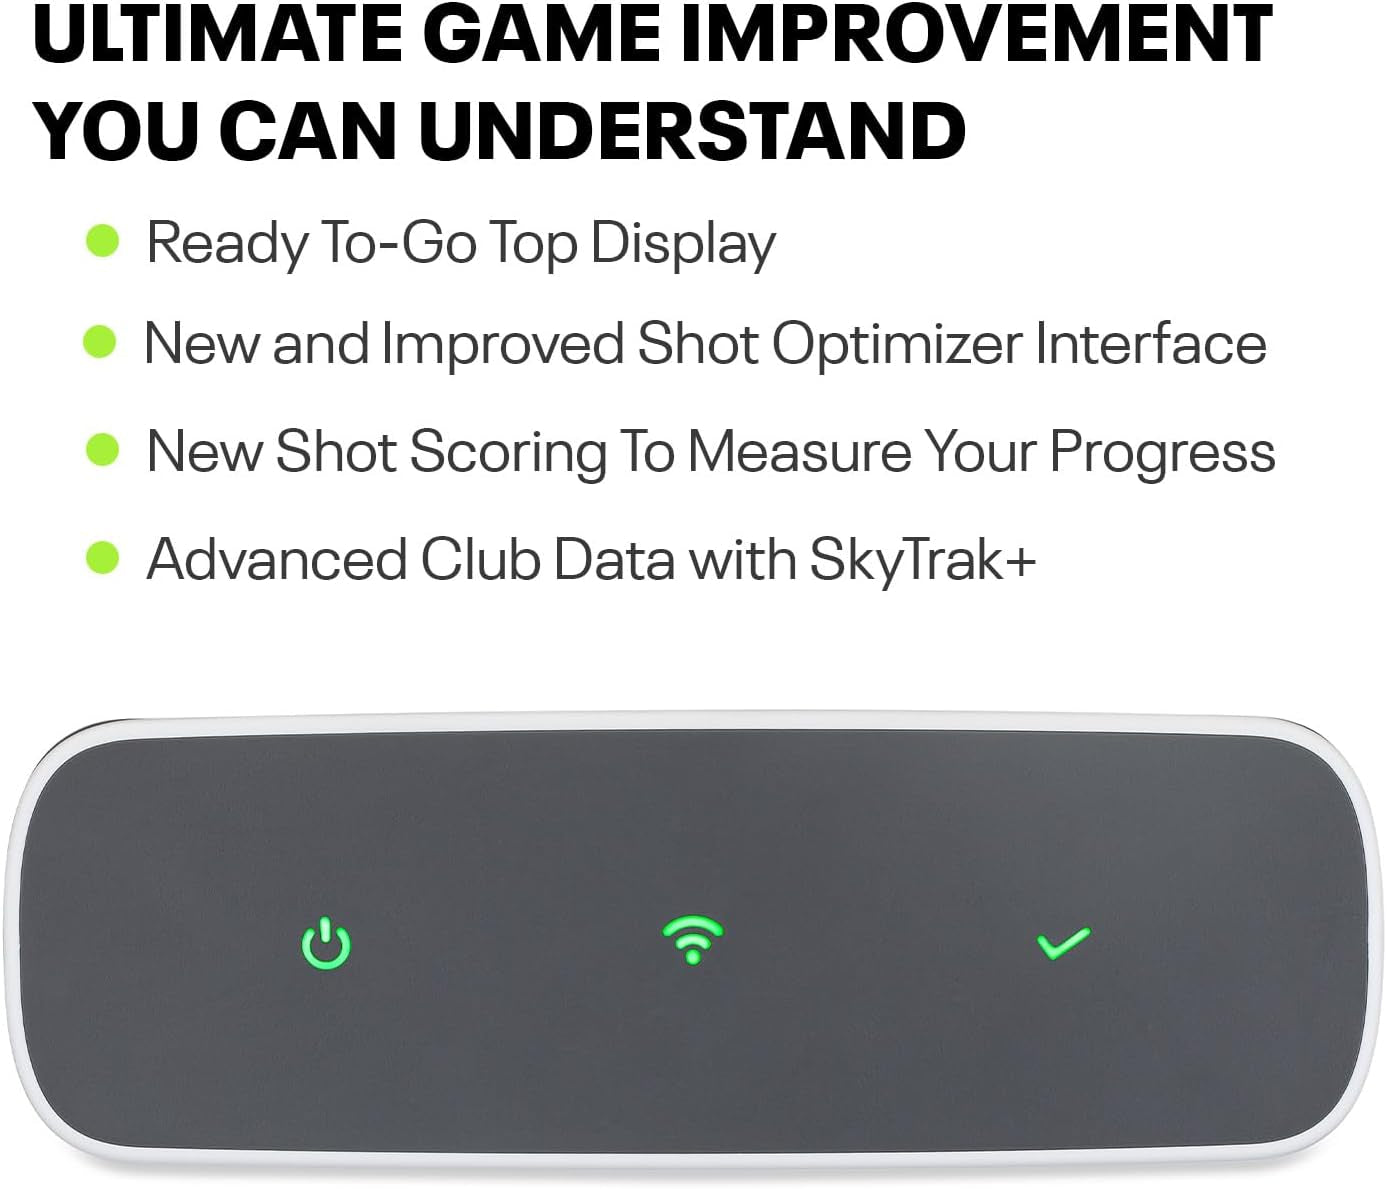 + Launch Monitor and Golf Simulator - Tour-Level Golf Analysis with Dual Doppler Radar, Enhanced Camera, 100K+ Courses, Real-Time Gameplay Simulation, Wi-Fi, USB-C Charging